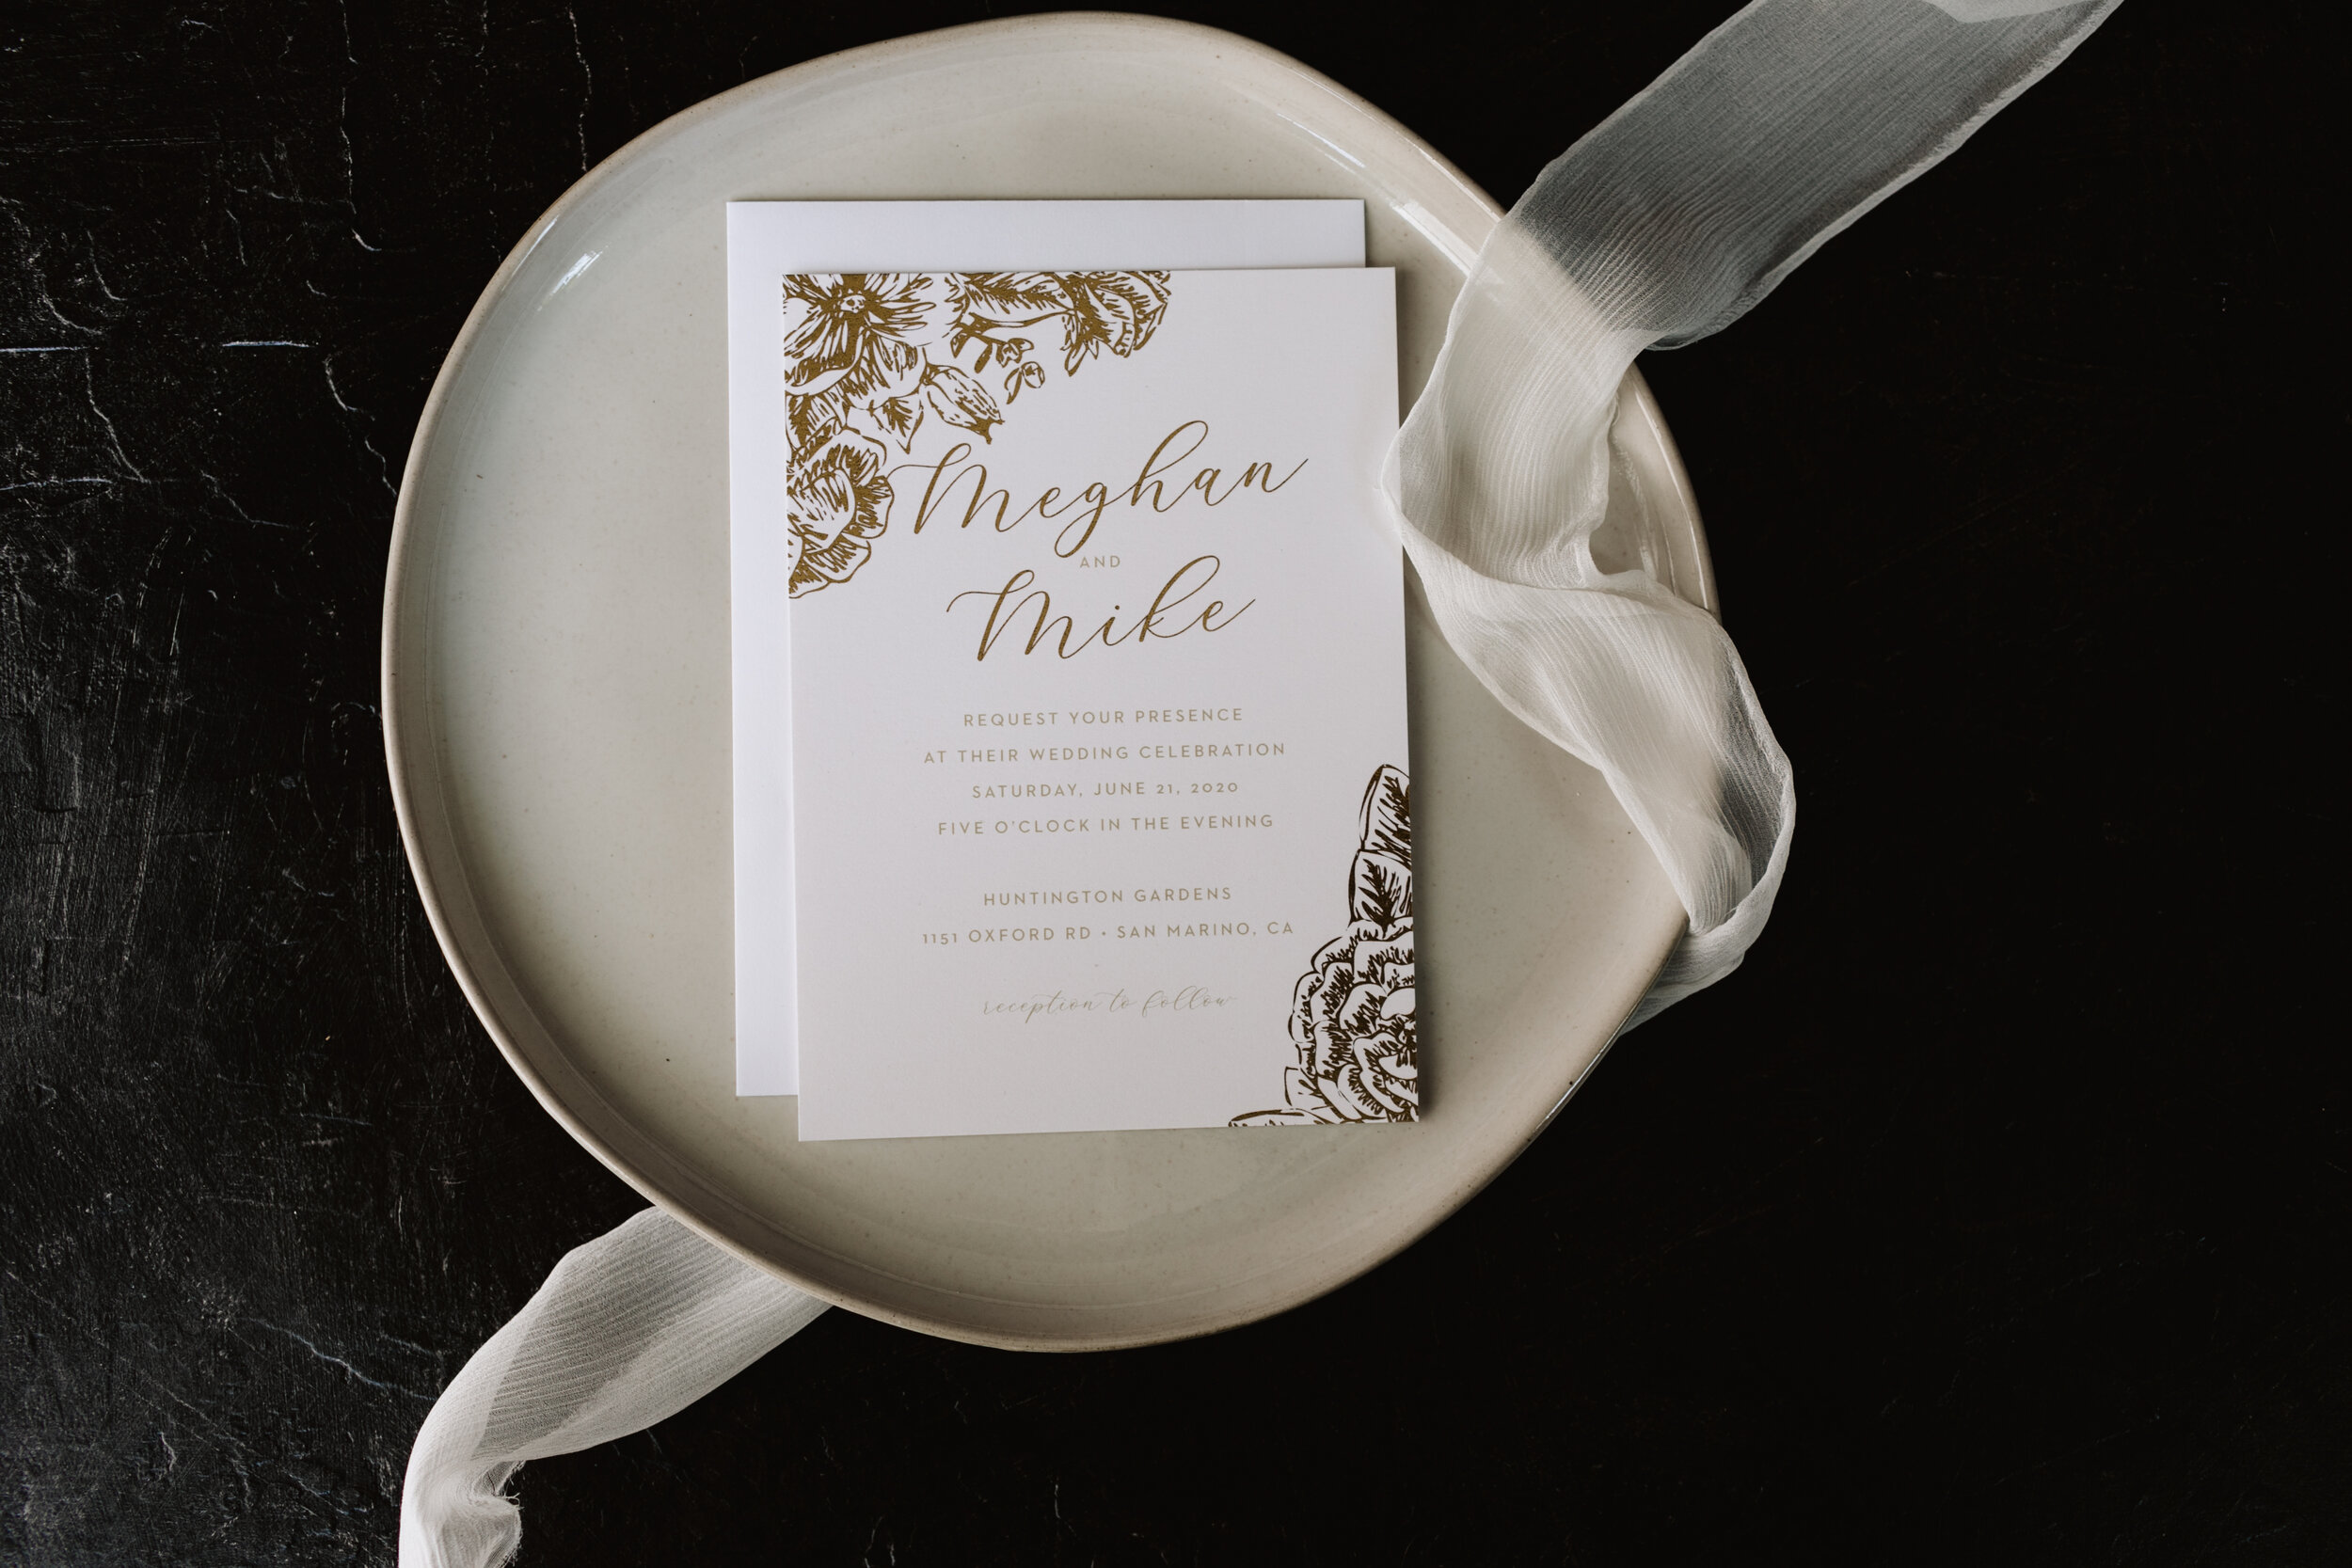 Basic Invite, Wedding Invitations, Save the Dates, Save the Date Maganets, Emily Wehner Photography-13.jpg